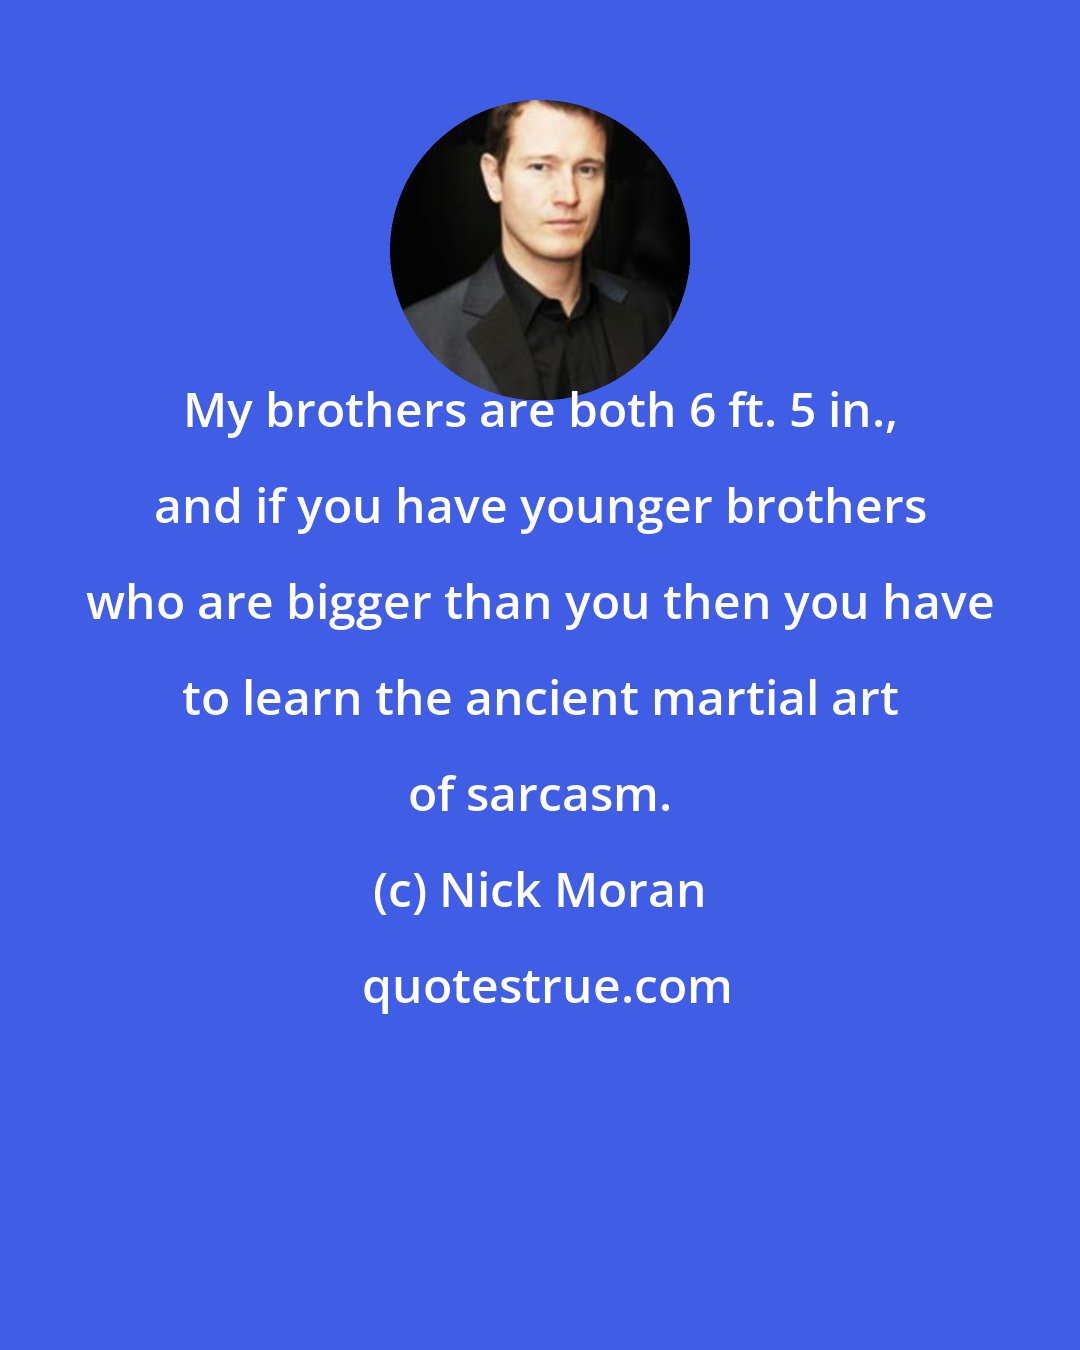 Nick Moran: My brothers are both 6 ft. 5 in., and if you have younger brothers who are bigger than you then you have to learn the ancient martial art of sarcasm.